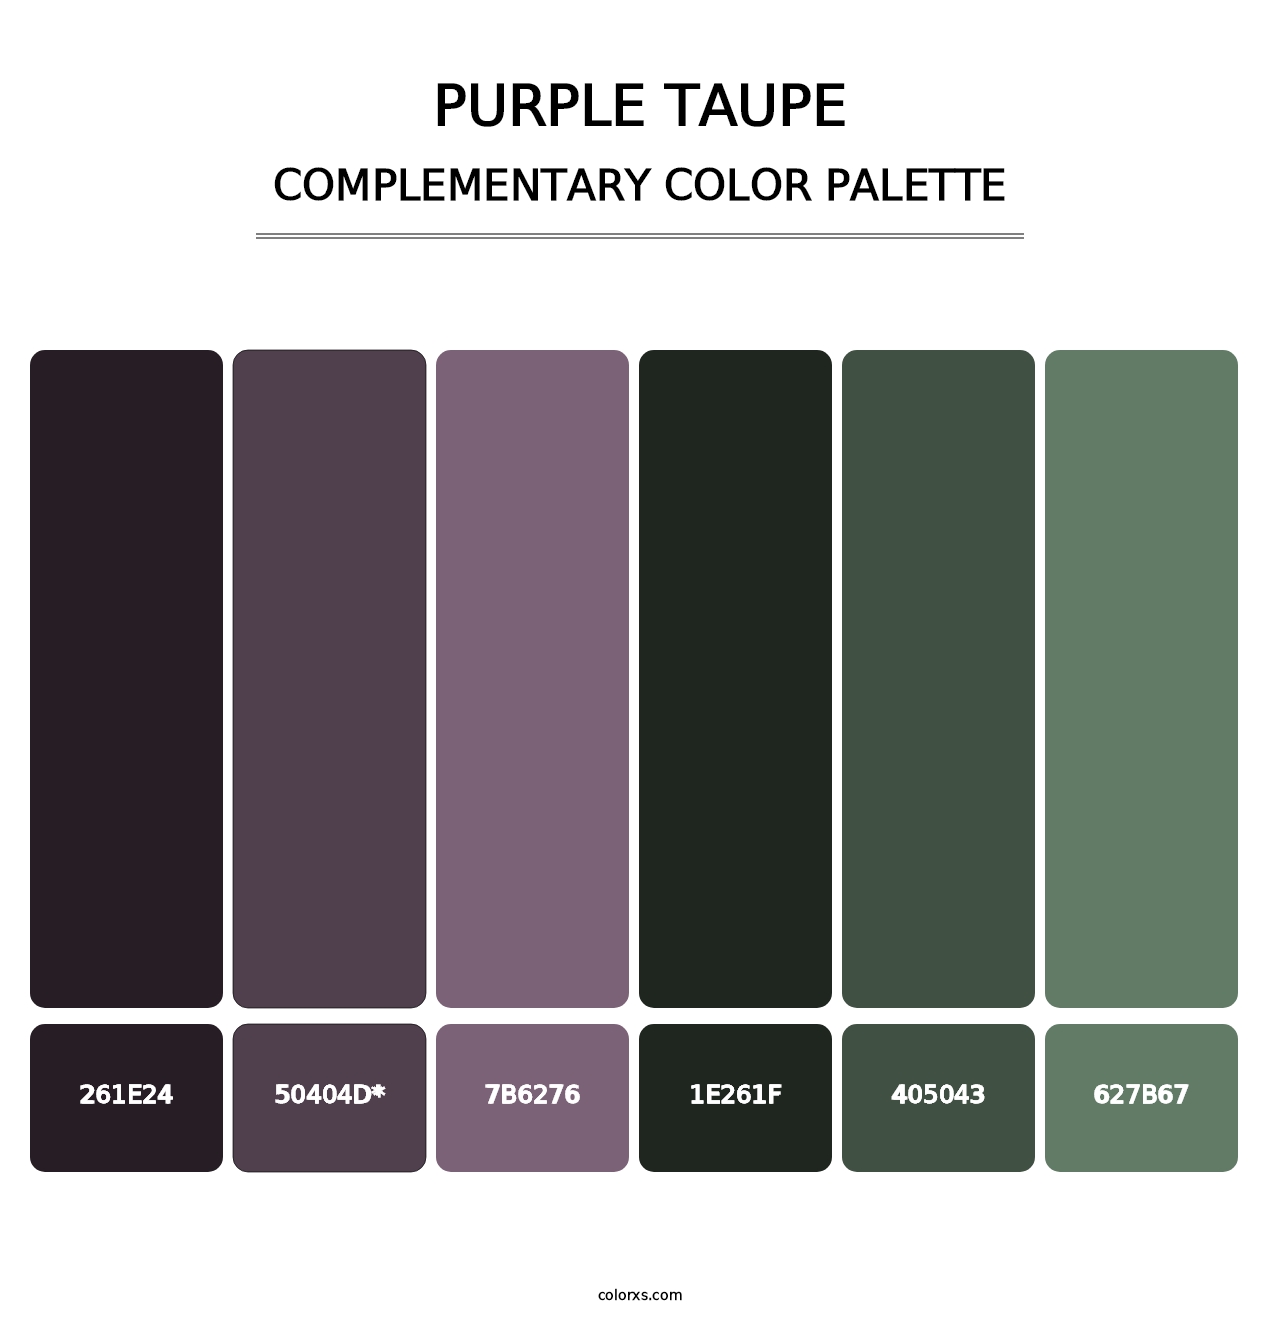 Purple Taupe - Complementary Color Palette